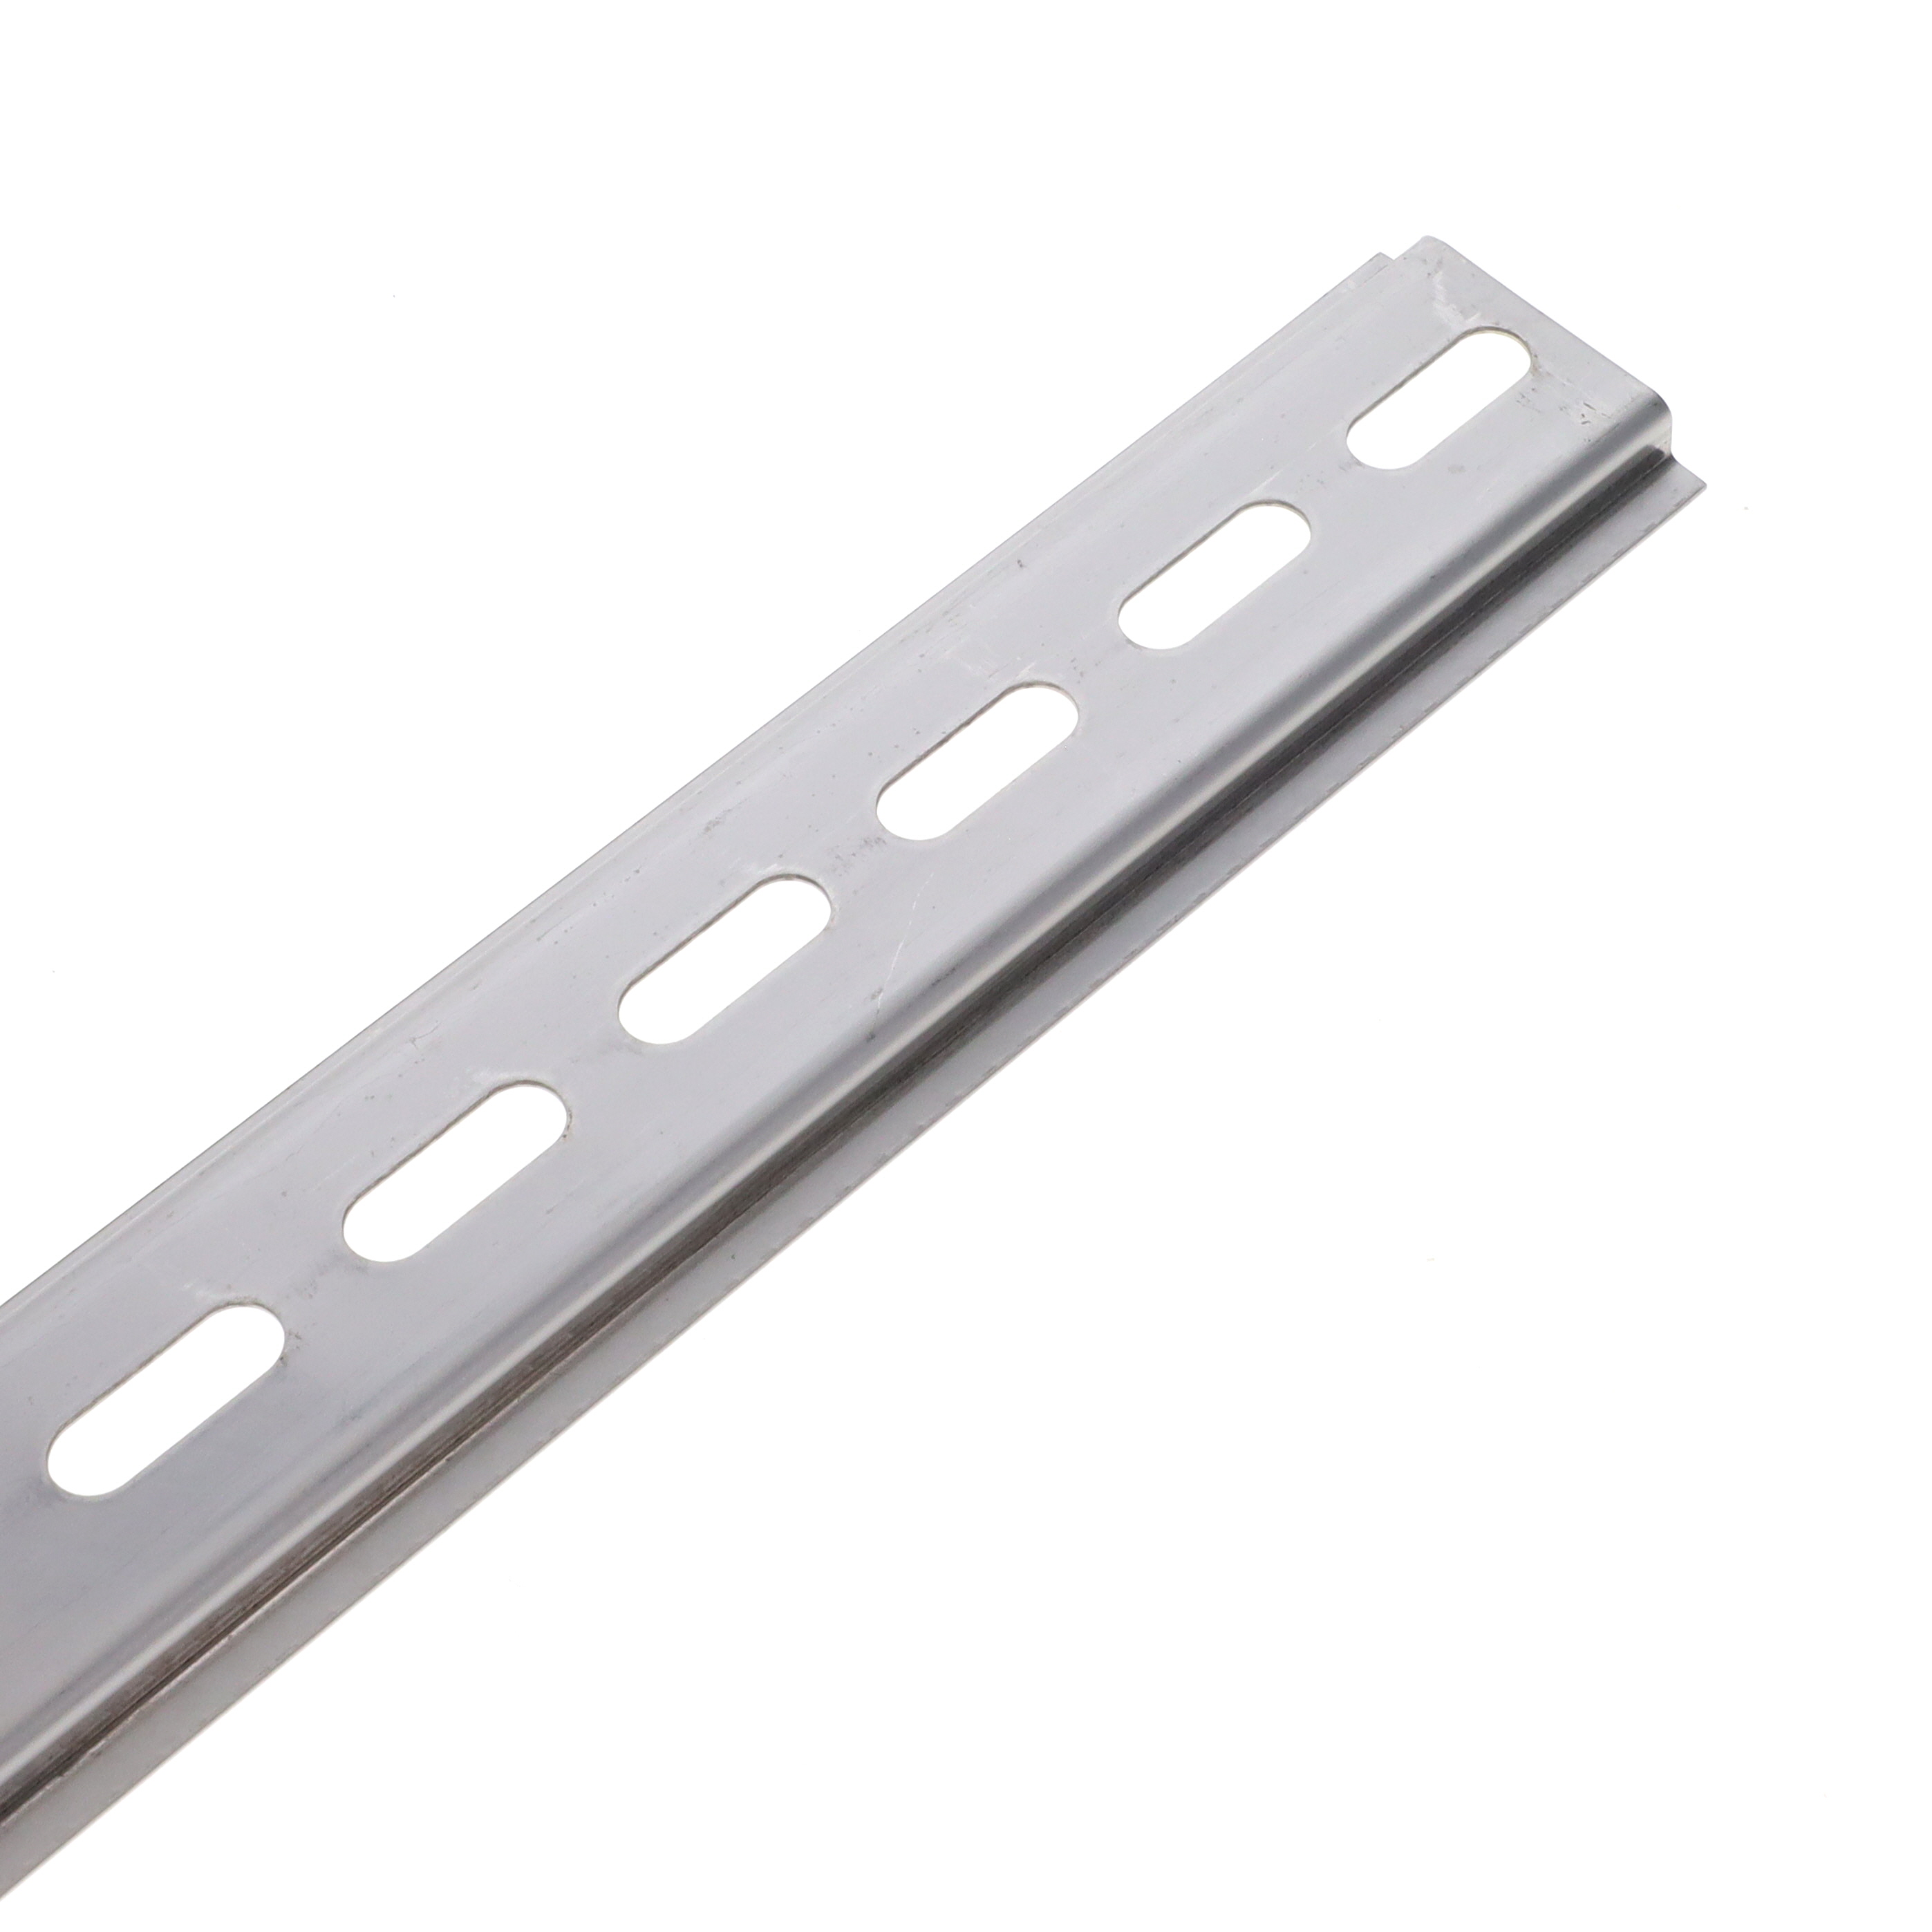 【2511125/1M】TS35X7.5 DIN RAIL STAINLESS PERF